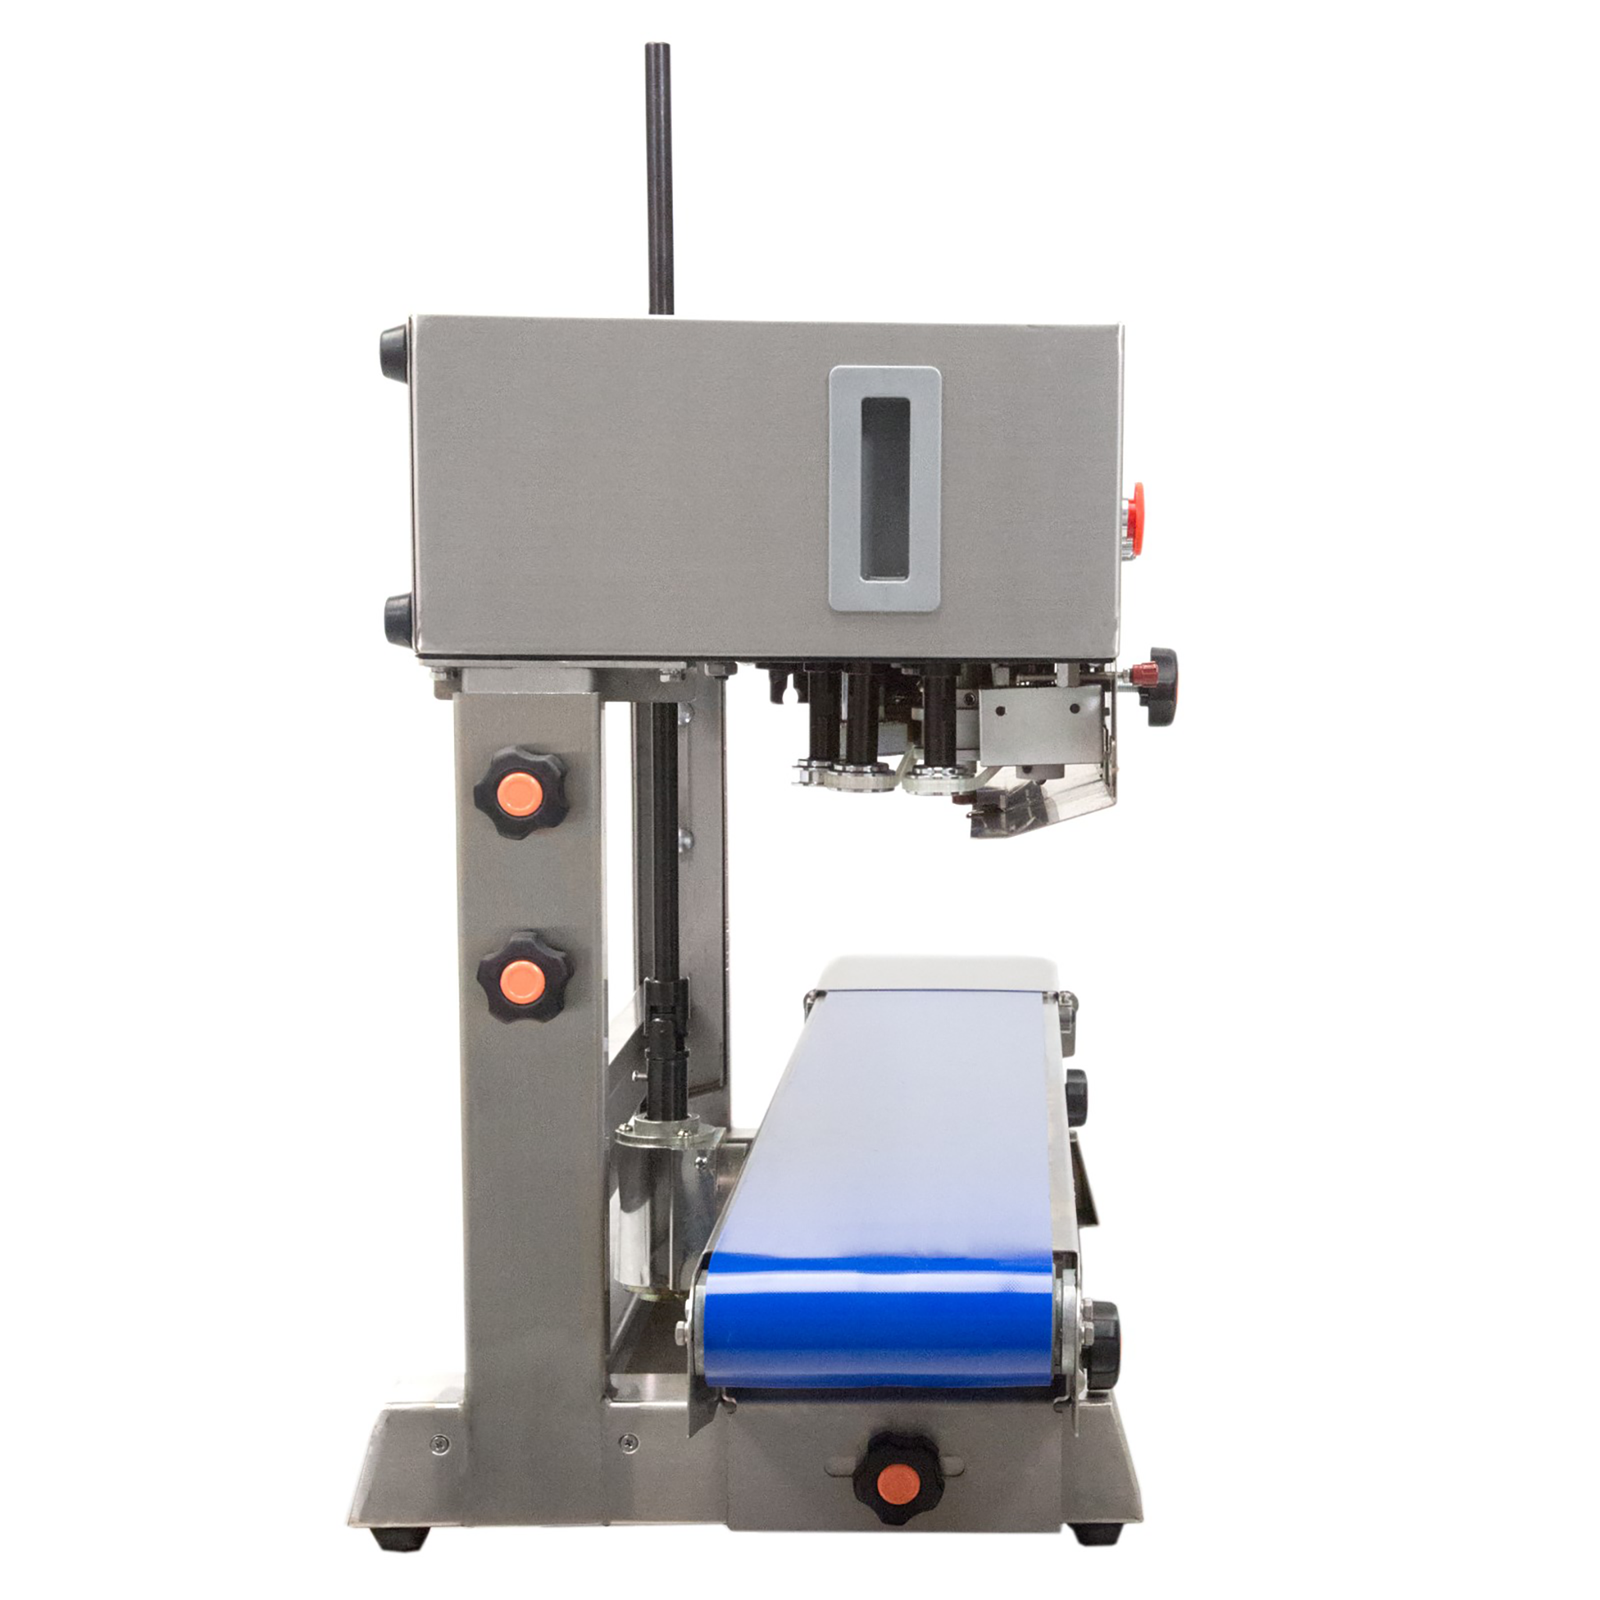 JORES TECHNOLOGIES® continuous band sealer with blue revolving belt. Shows 2 knobs used to adjust the height and 1 knob to adjust the position of the band.